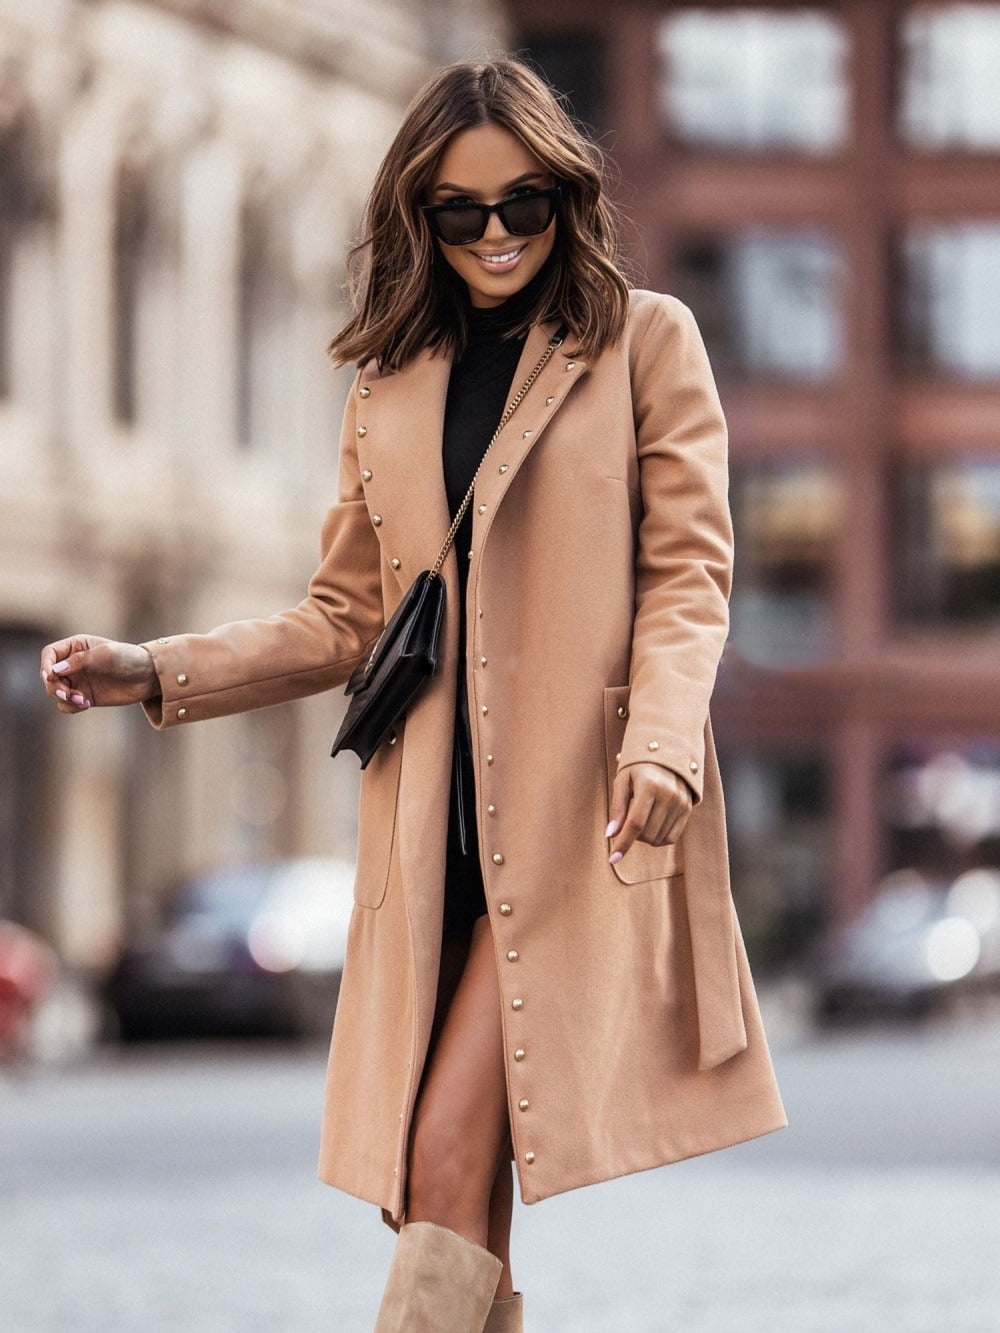 6 Colors Women Fashion Batwing Sleeve Wool Coat Solid Color Short